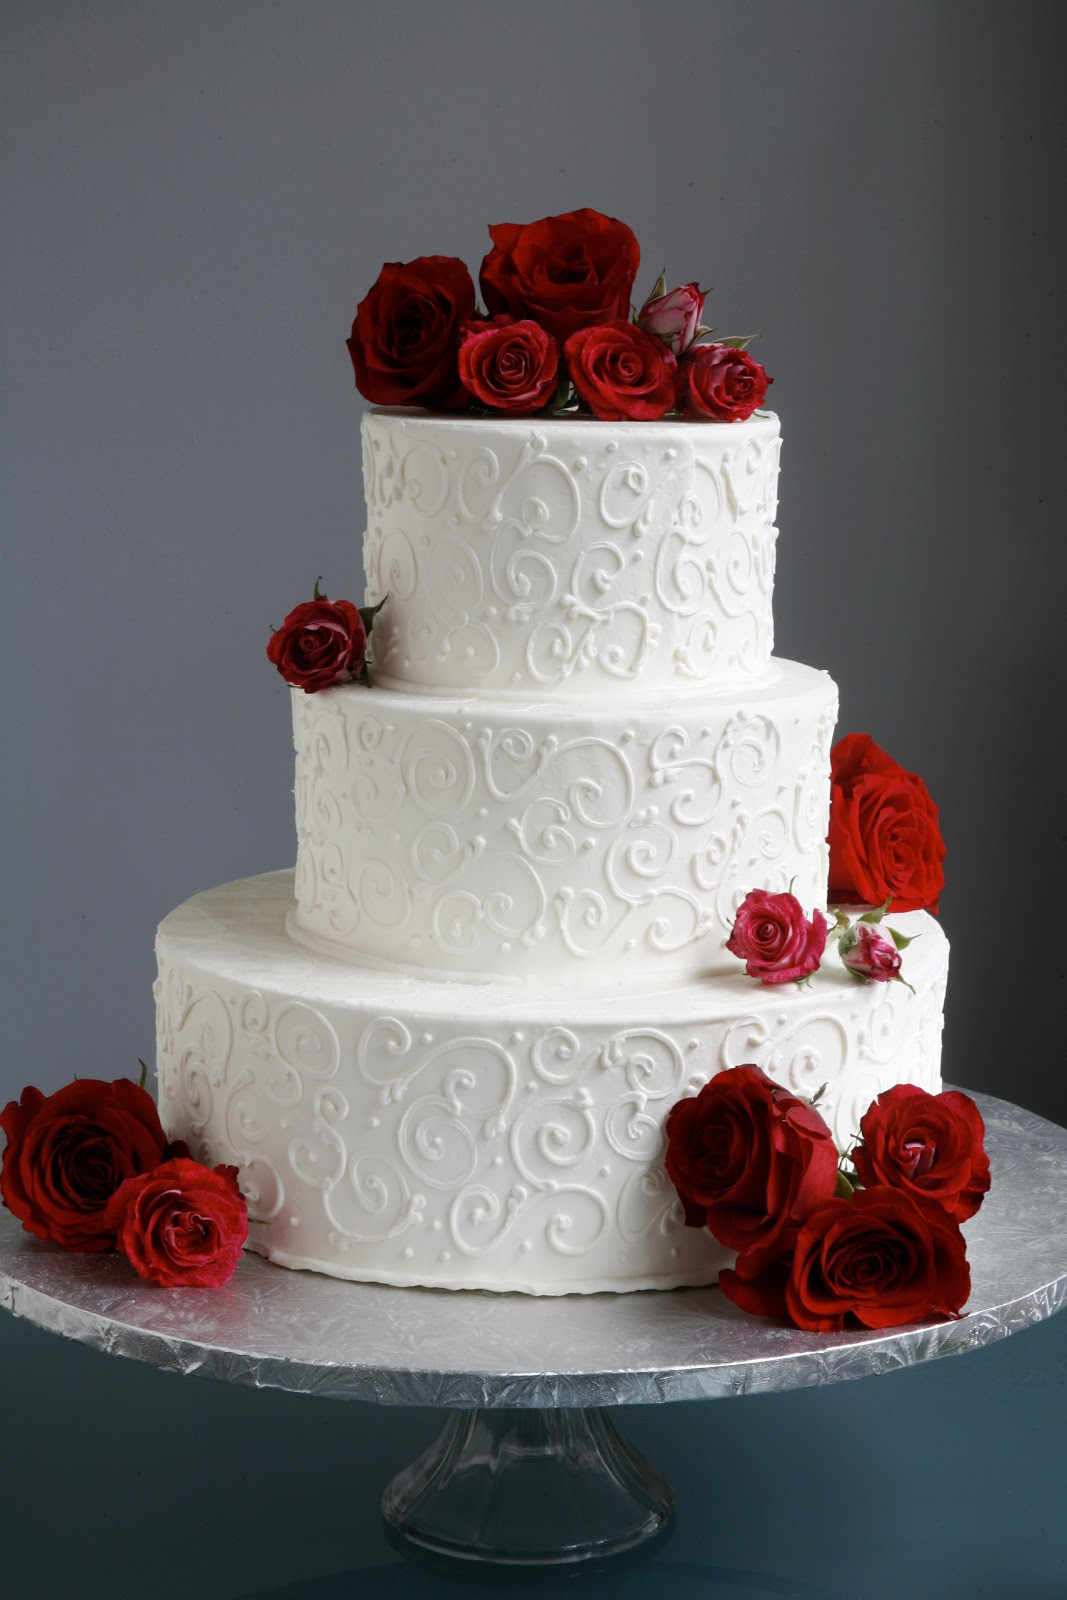 Wedding Cakes With Flowers
 A Simple Cake Wedding Cake with Fresh Flowers From